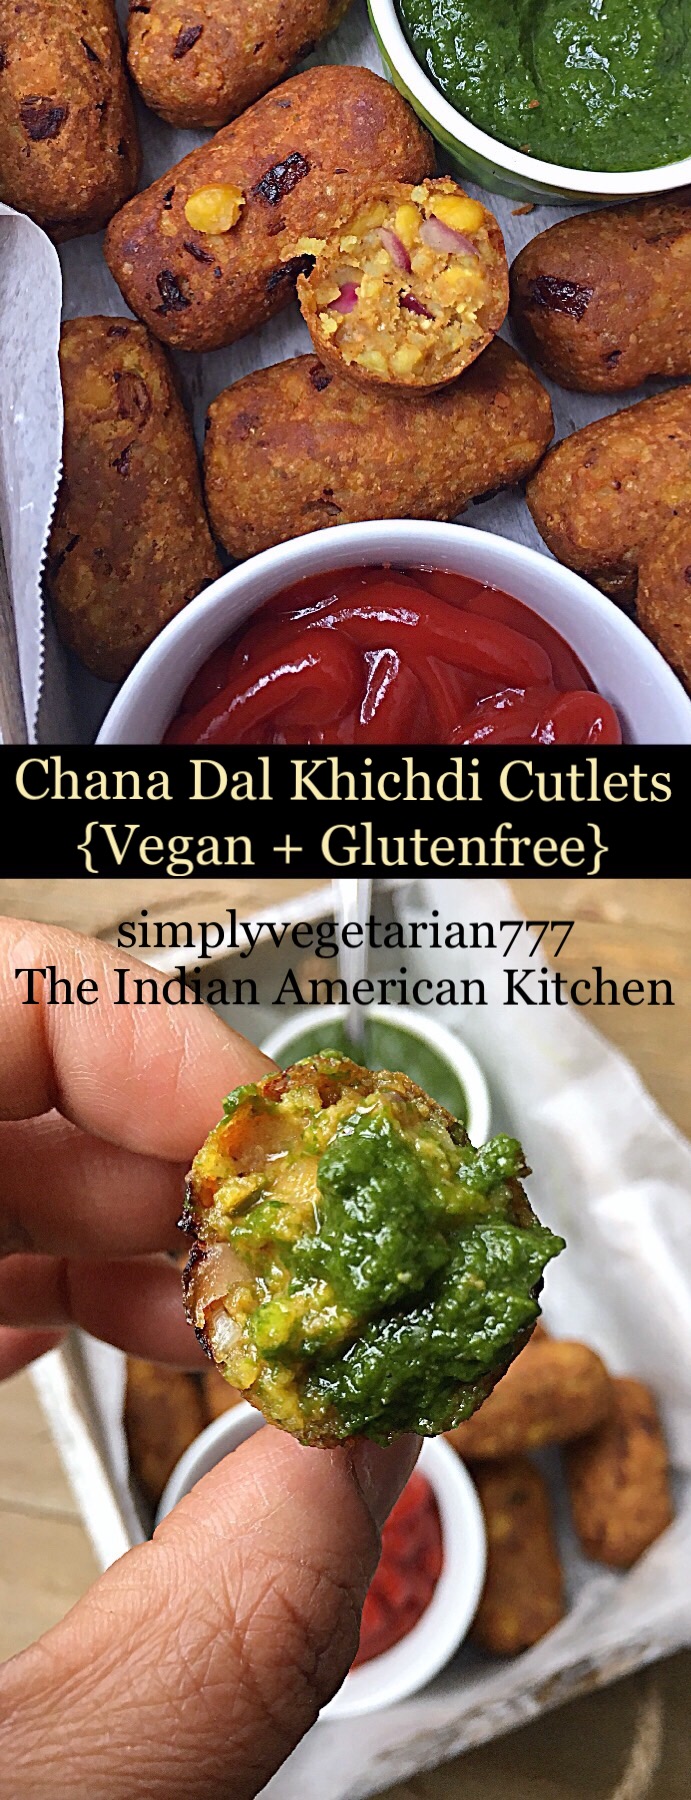 Chana Dal Cutlets are super easy to make using leftover khichdi and repurposing it into delicious Cutlets. If you are looking for recipes that uses leftover food then it is a perfect recipe for you. #vegansnacks #glutenfreesnacks #khichdi #chanadalrecipes #cutlets #vegetariankebabs